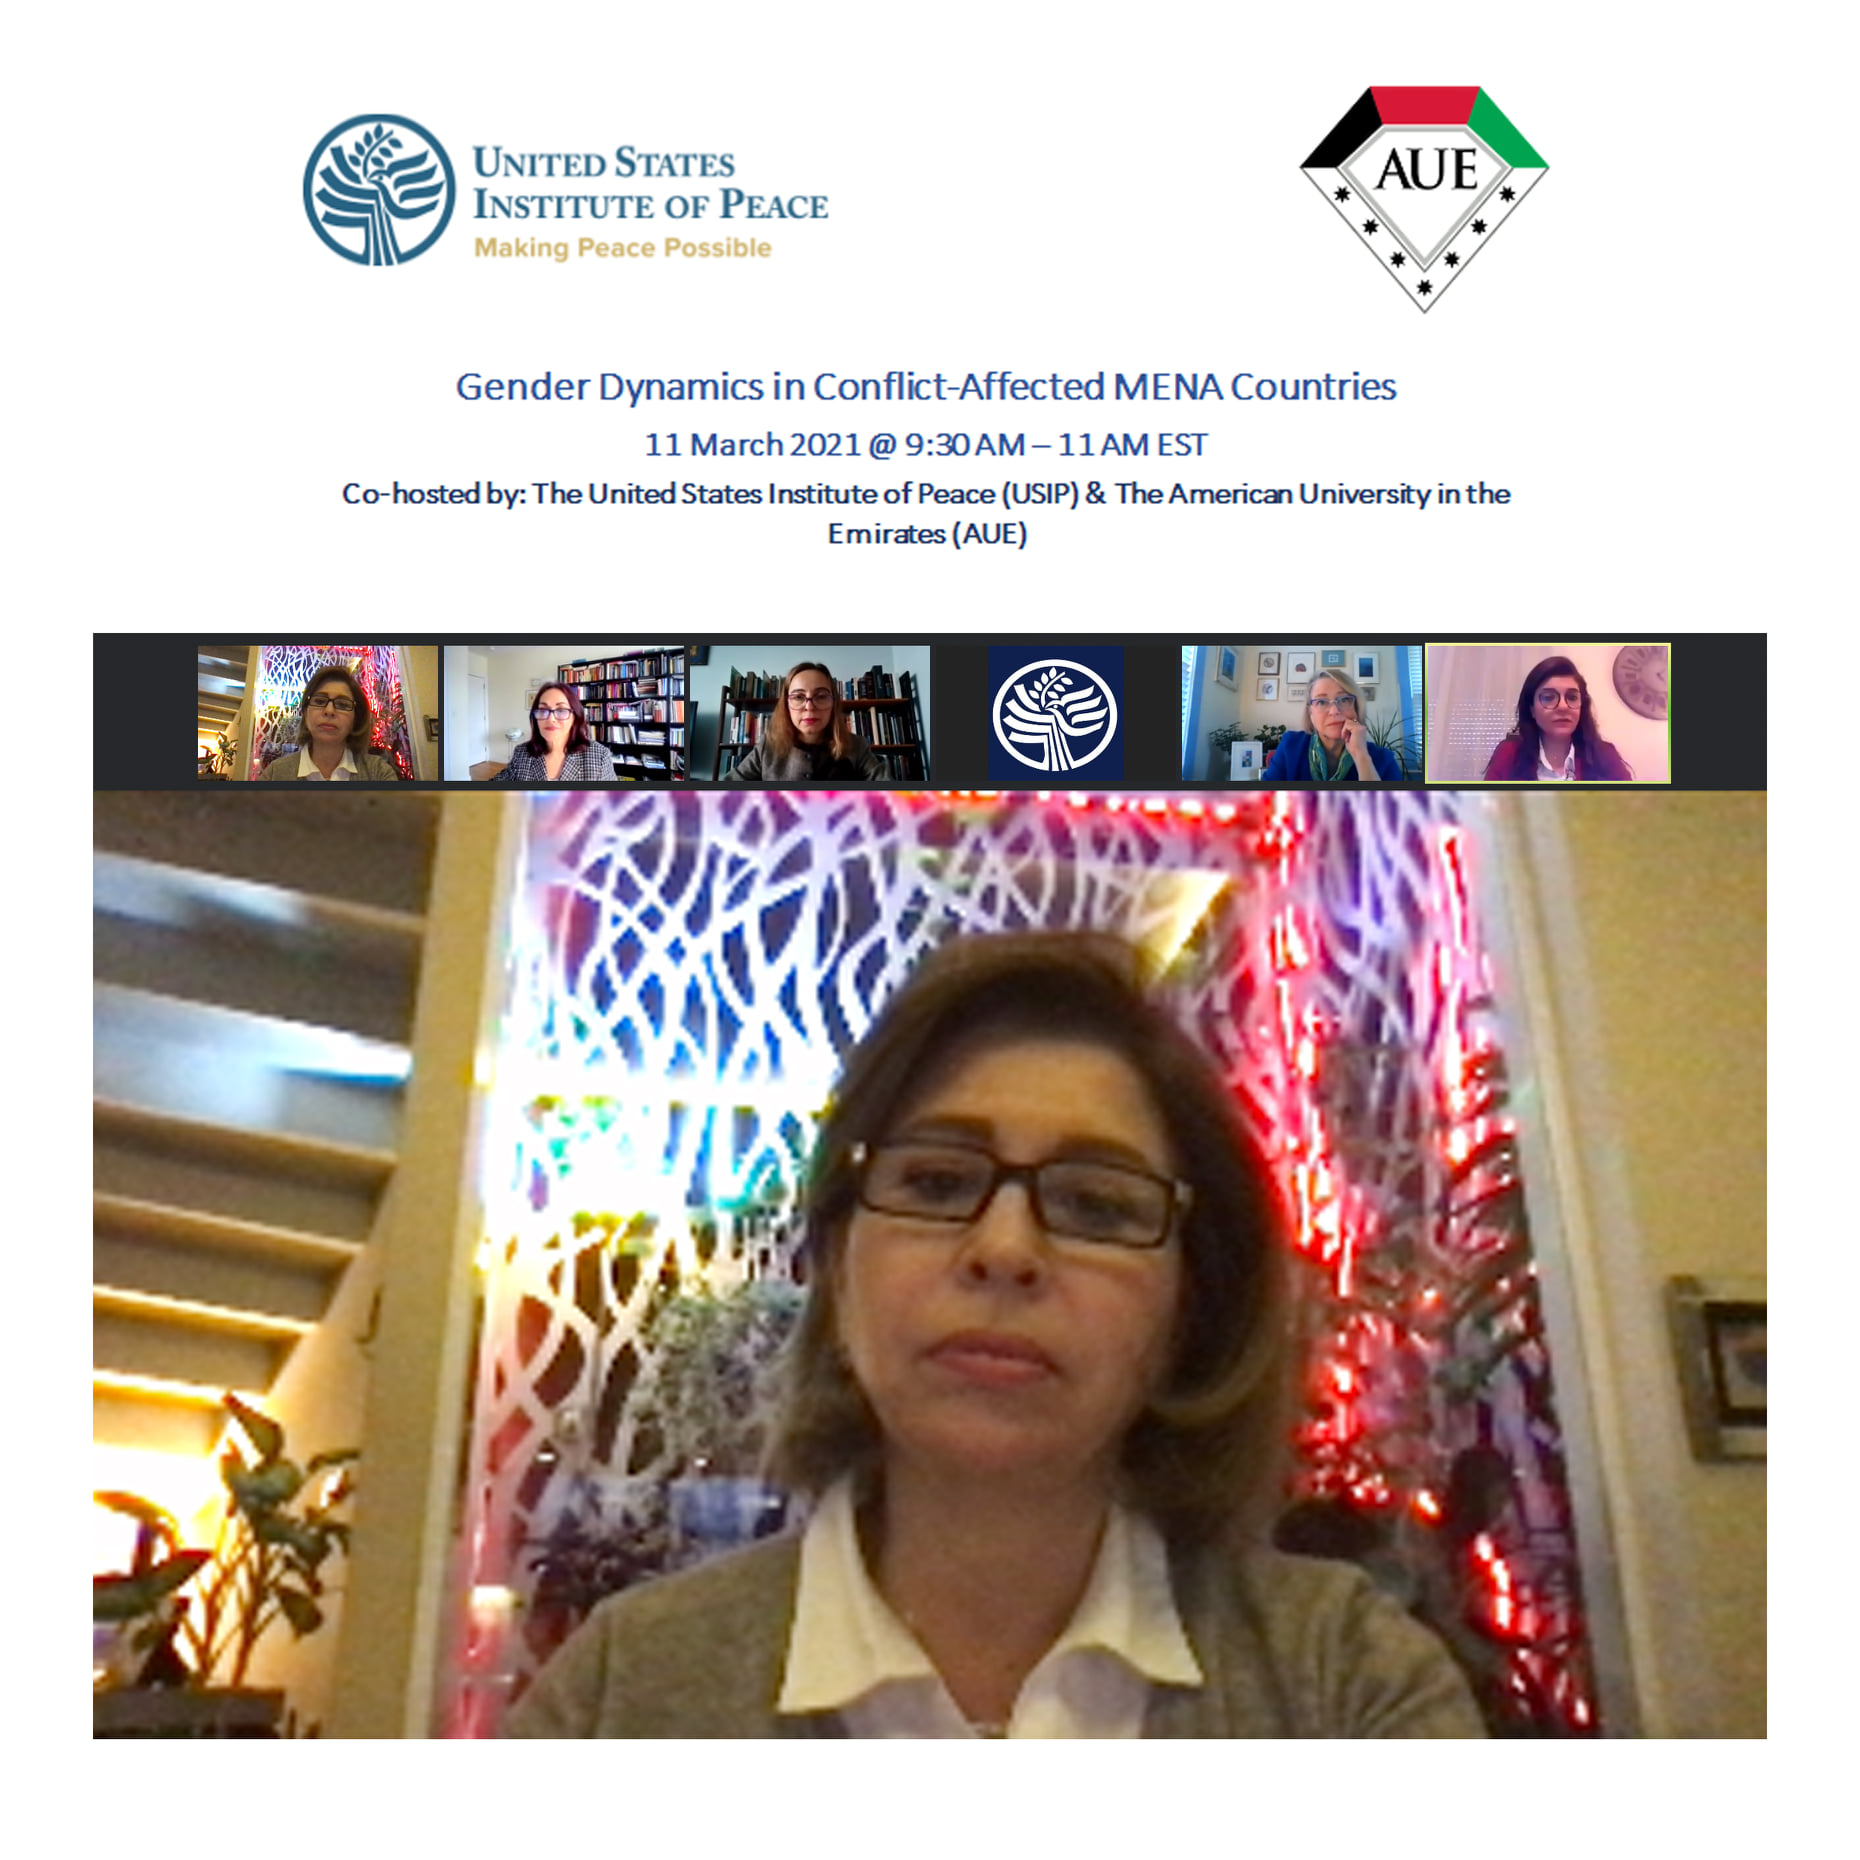 Ms. Suzan Aref participates as a Speaker in a Webinar on Gender Dynamics in Conflict- Affected MENA countries